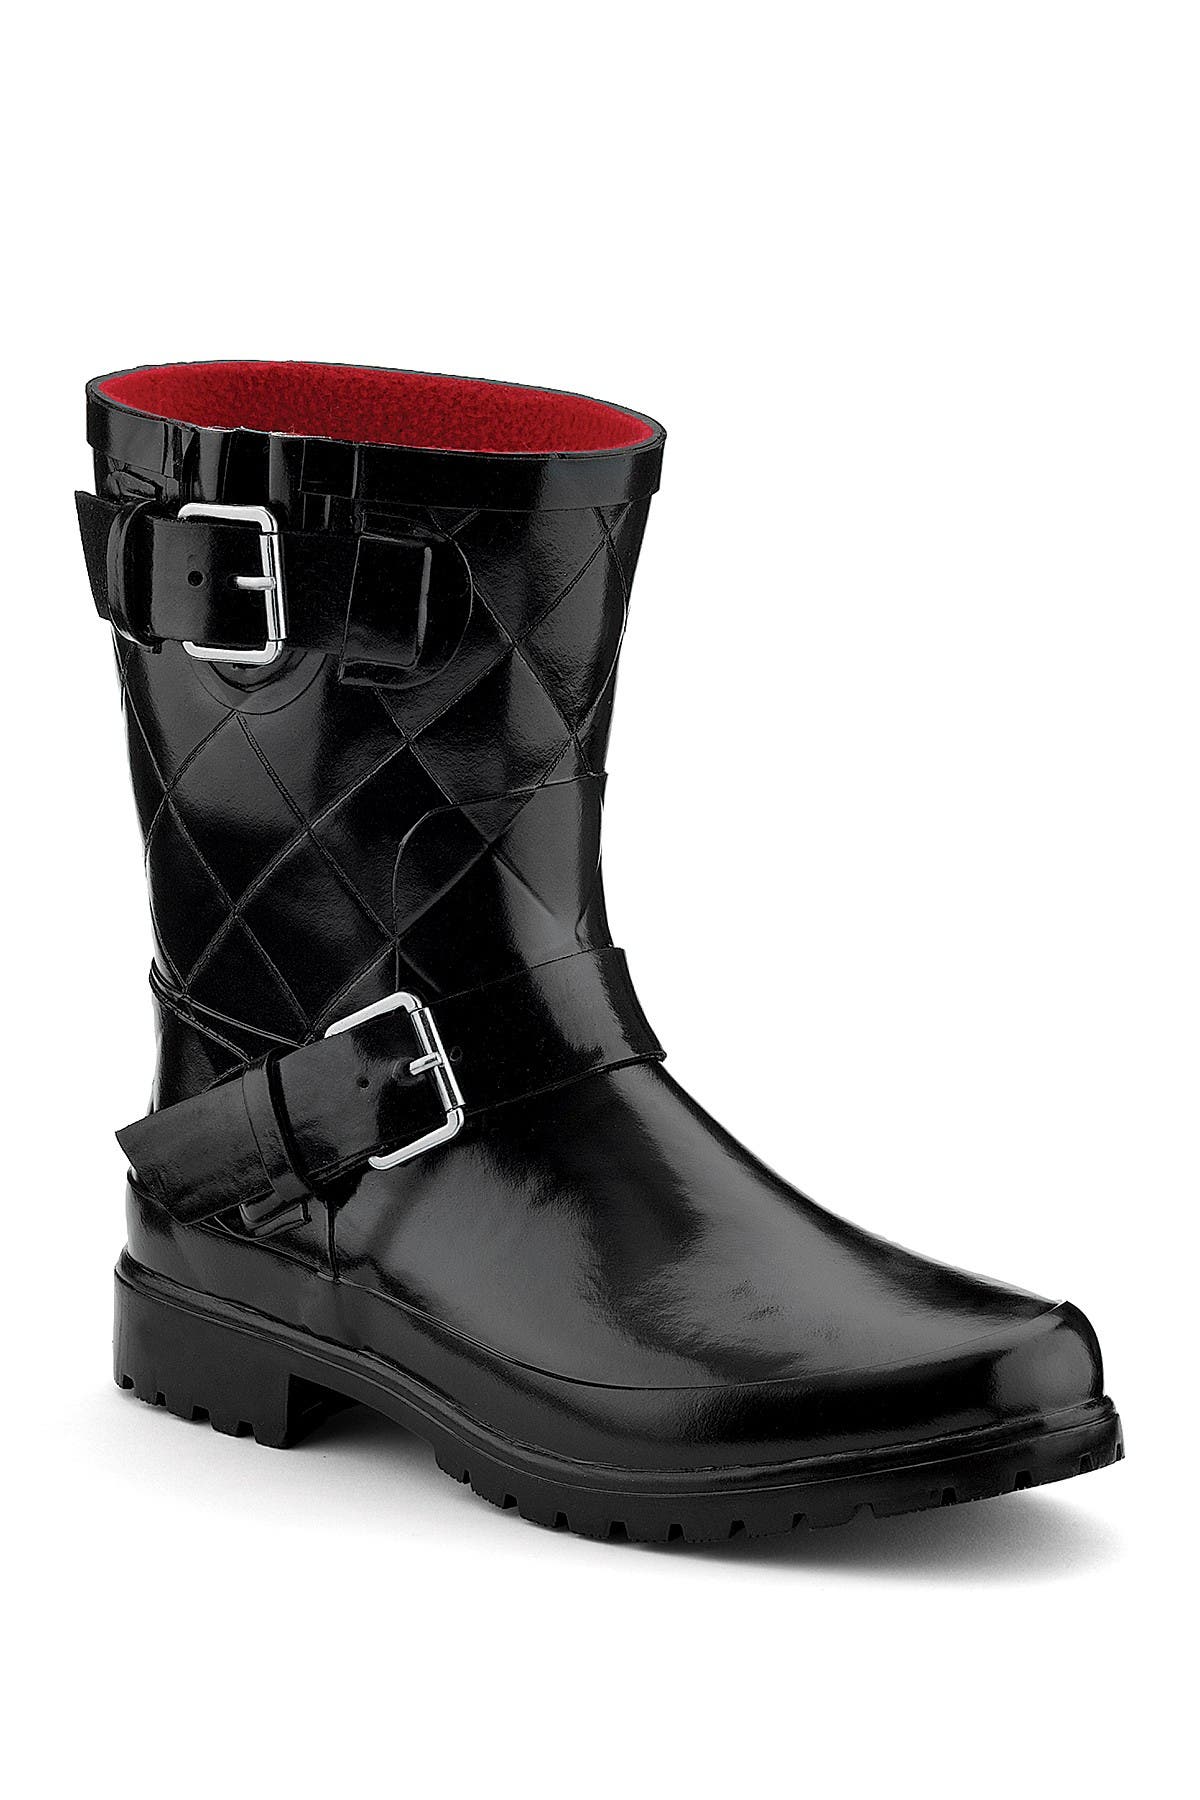 sperry quilted rain boots